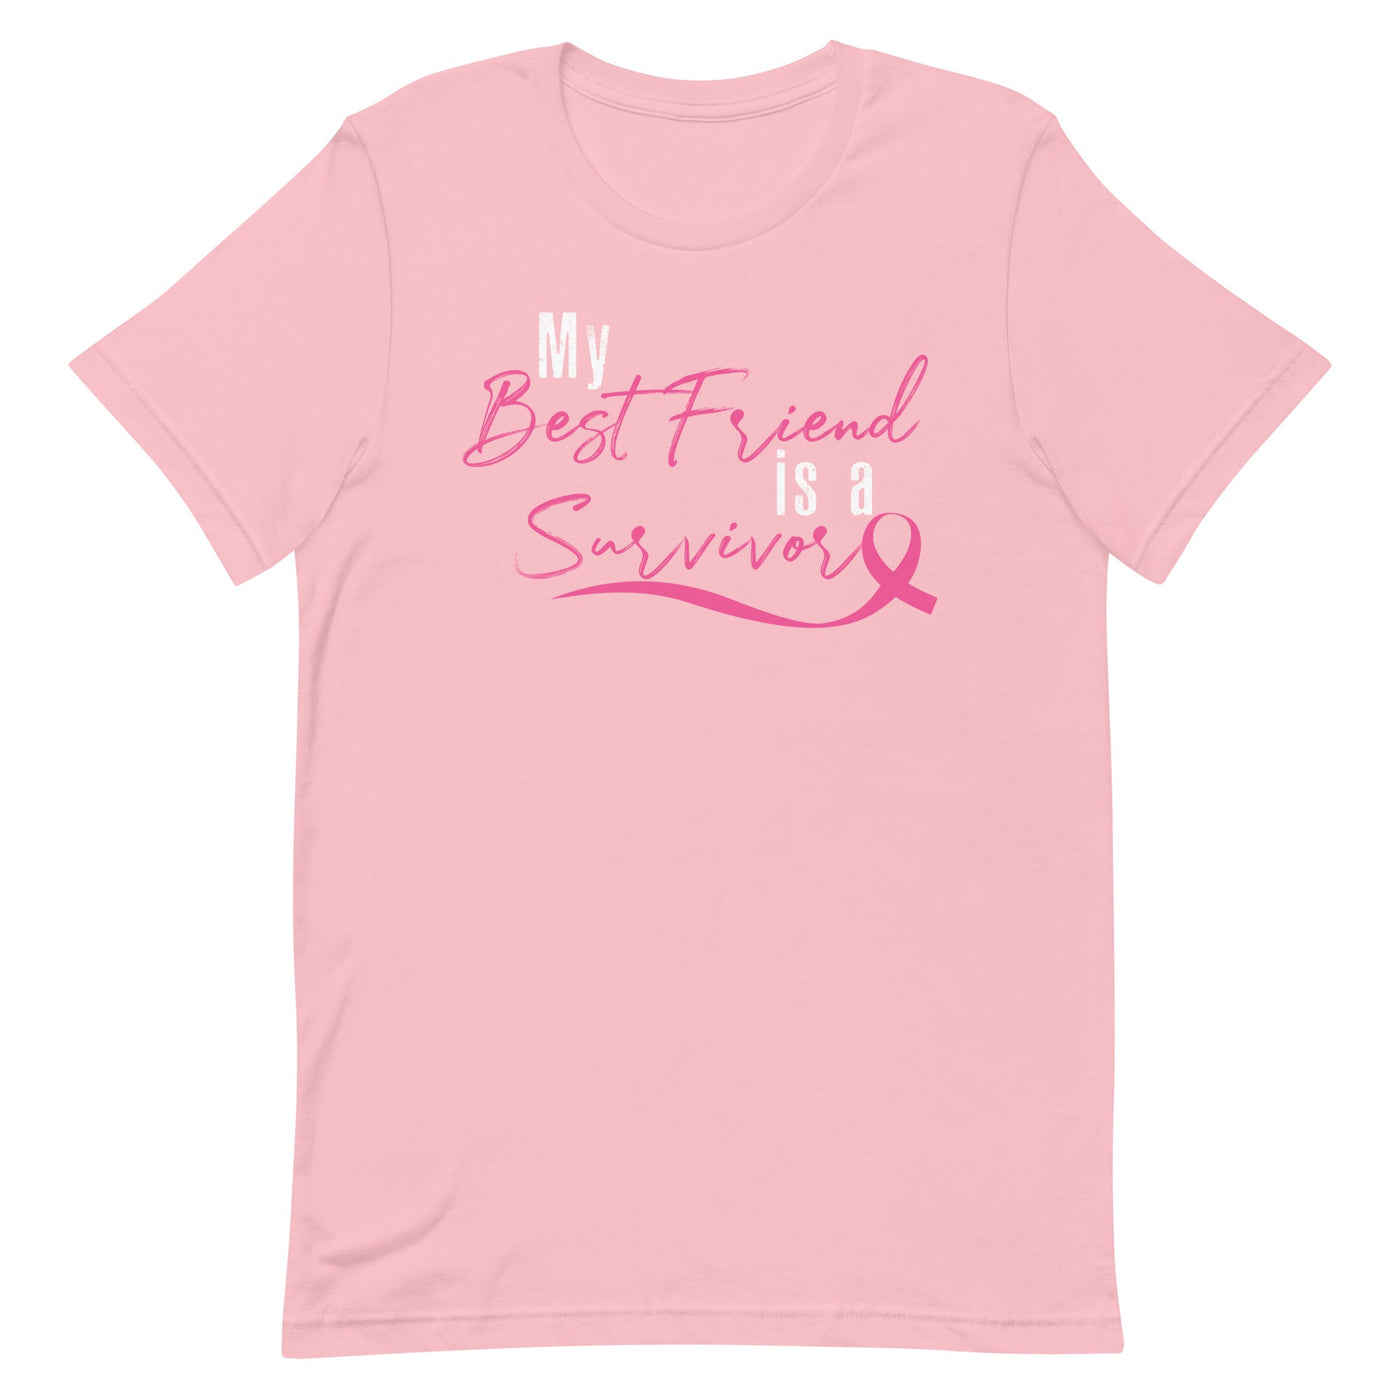 MY BEST FRIEND IS A SURVIVOR WOMEN'S SHIRT - PINK AND WHITE FONT Pink S 